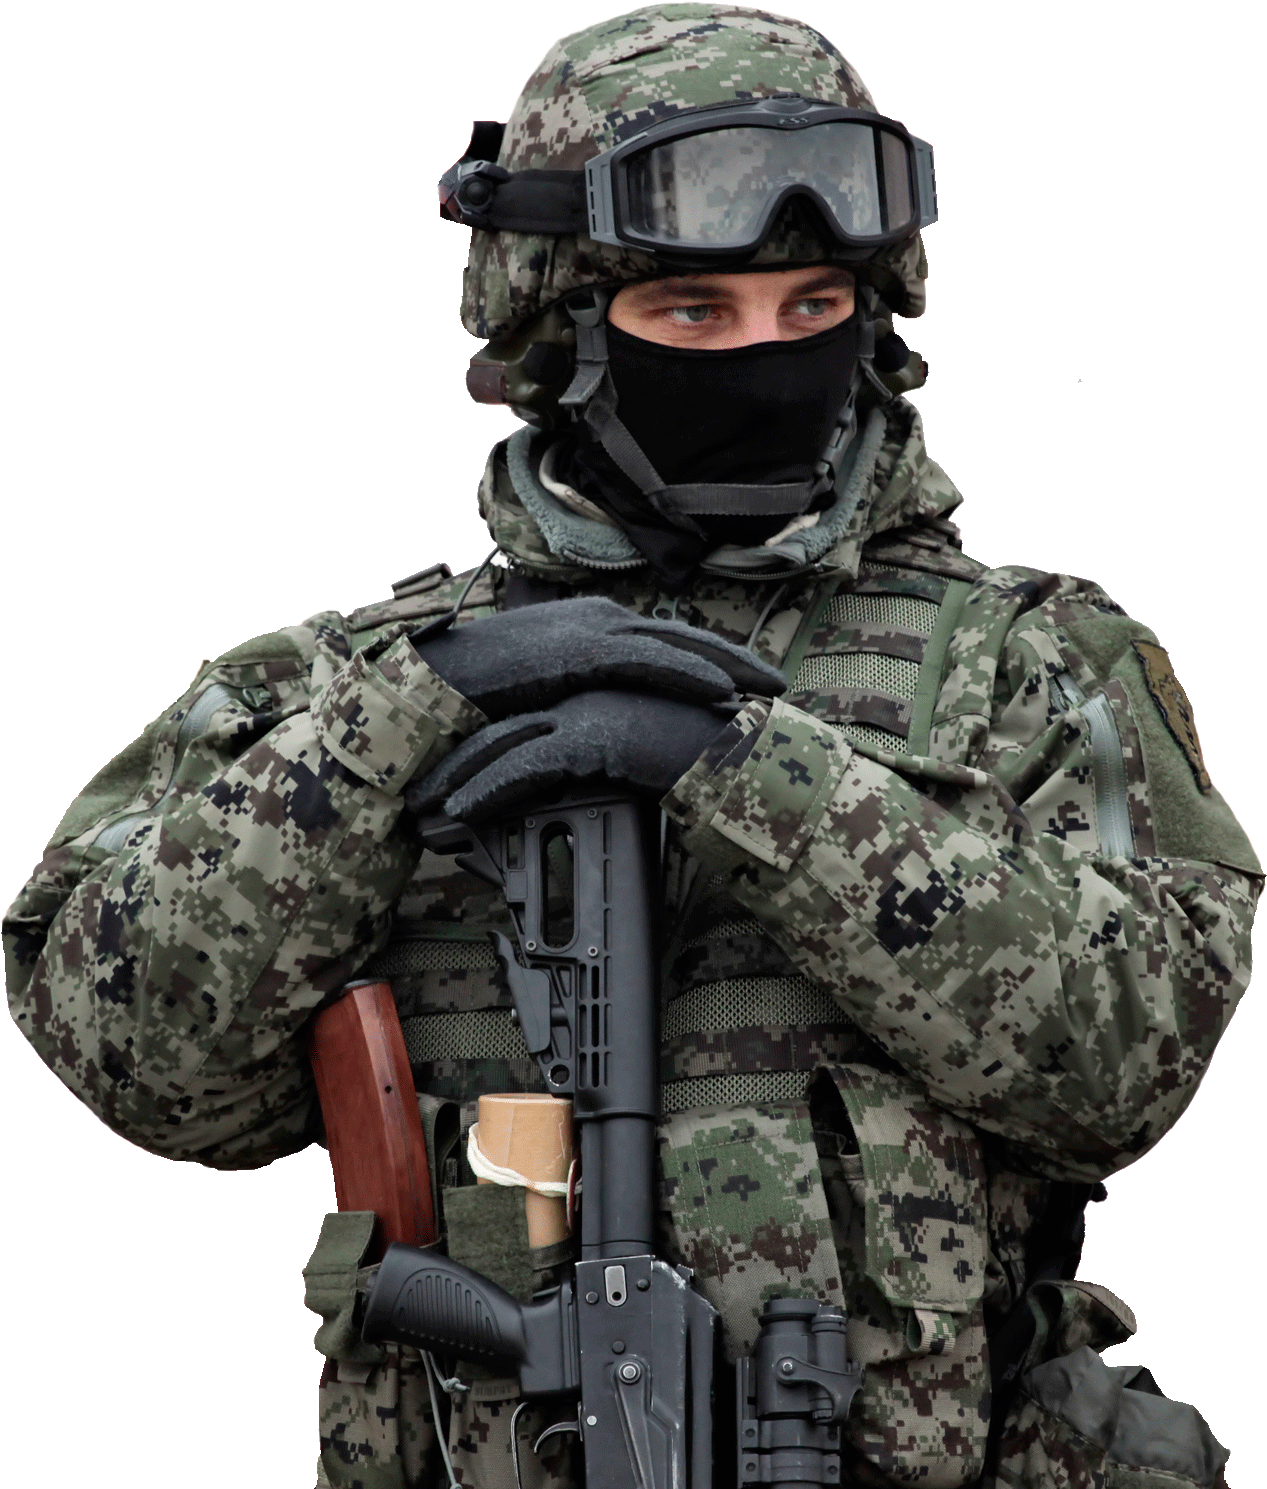 Military Soldier Portrait Camouflage Gear PNG